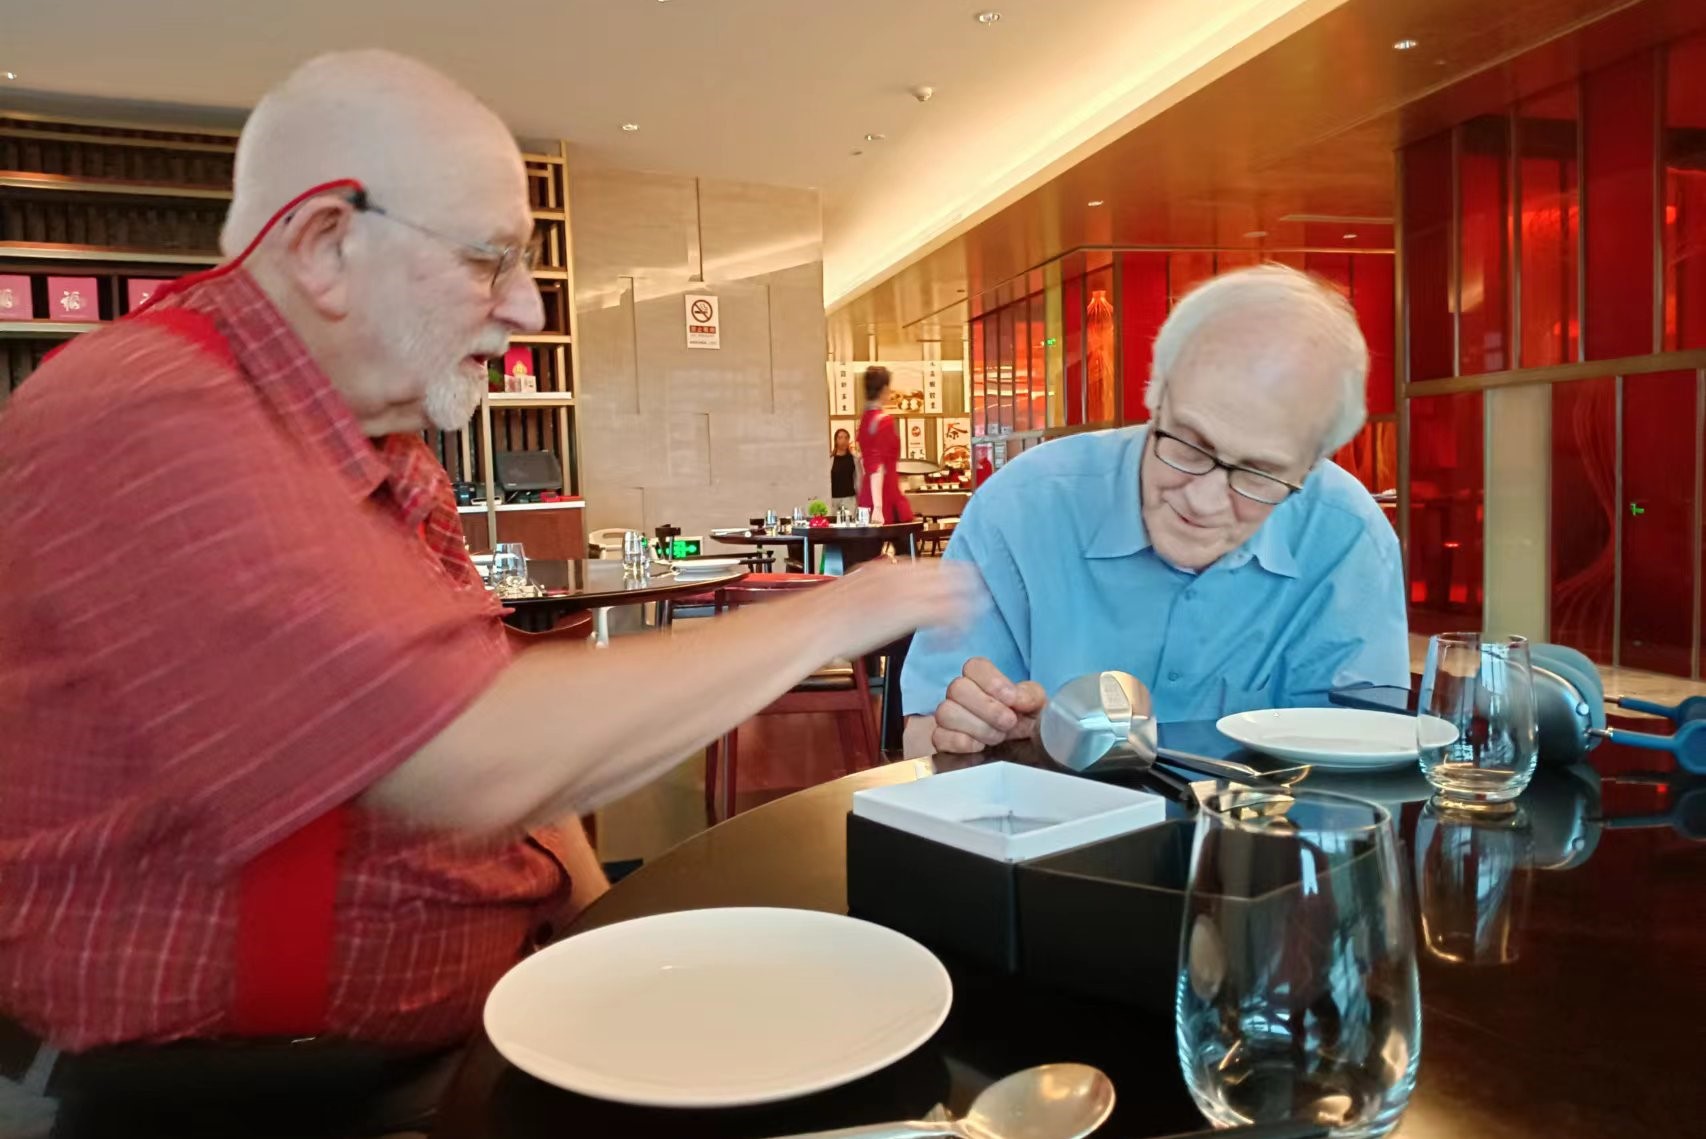 Sir Michael Berry explains mechanical equilibrium to David Gross, using Gömböc 2023 in the lobby of the Sunsrise Kempinski Hotel in Beijing, on July 19th 2023.